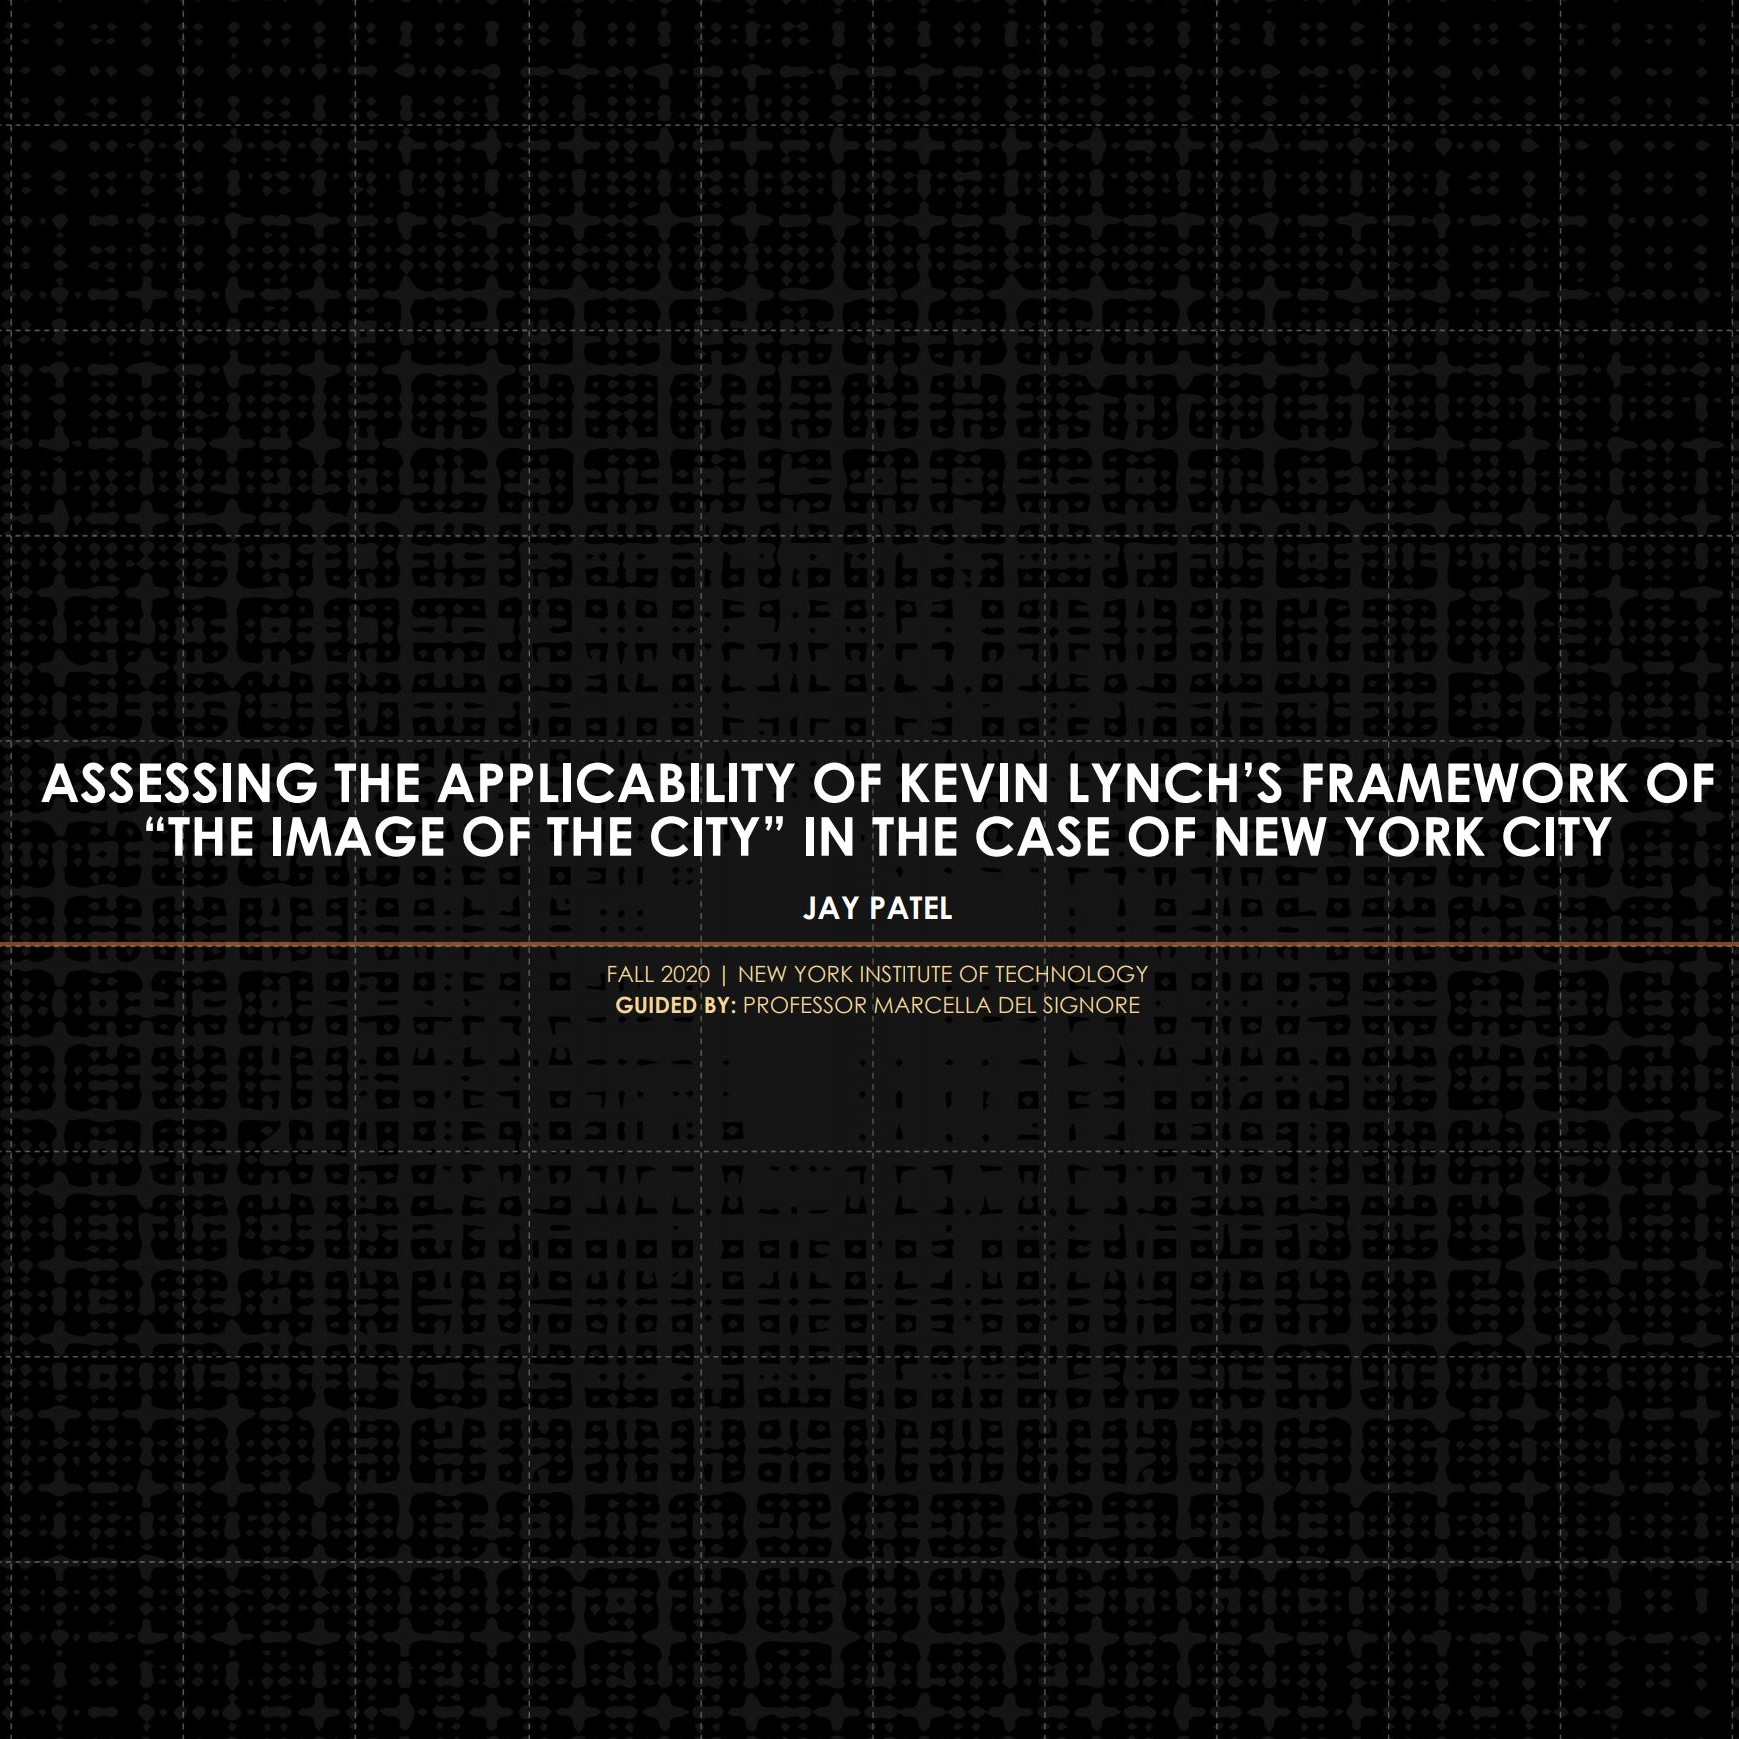 Assessing the applicability of Kevin Lynch’s framework of “The Image of the city” in the case of New York City